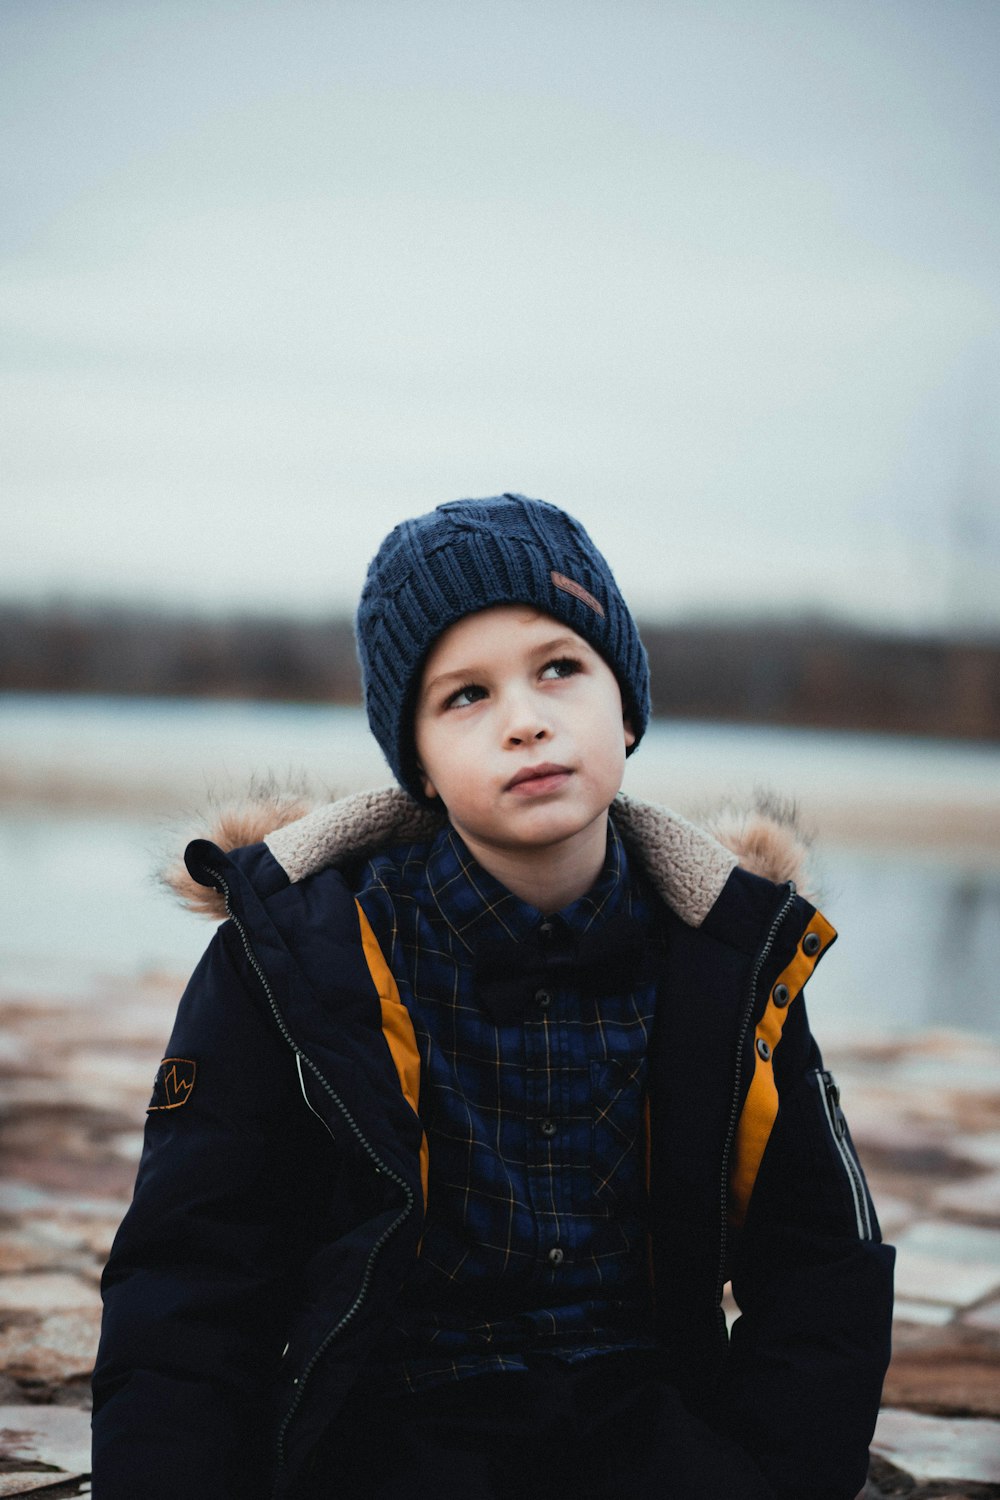 boy in black and yellow jacket and knit cap standing near body of water during daytime